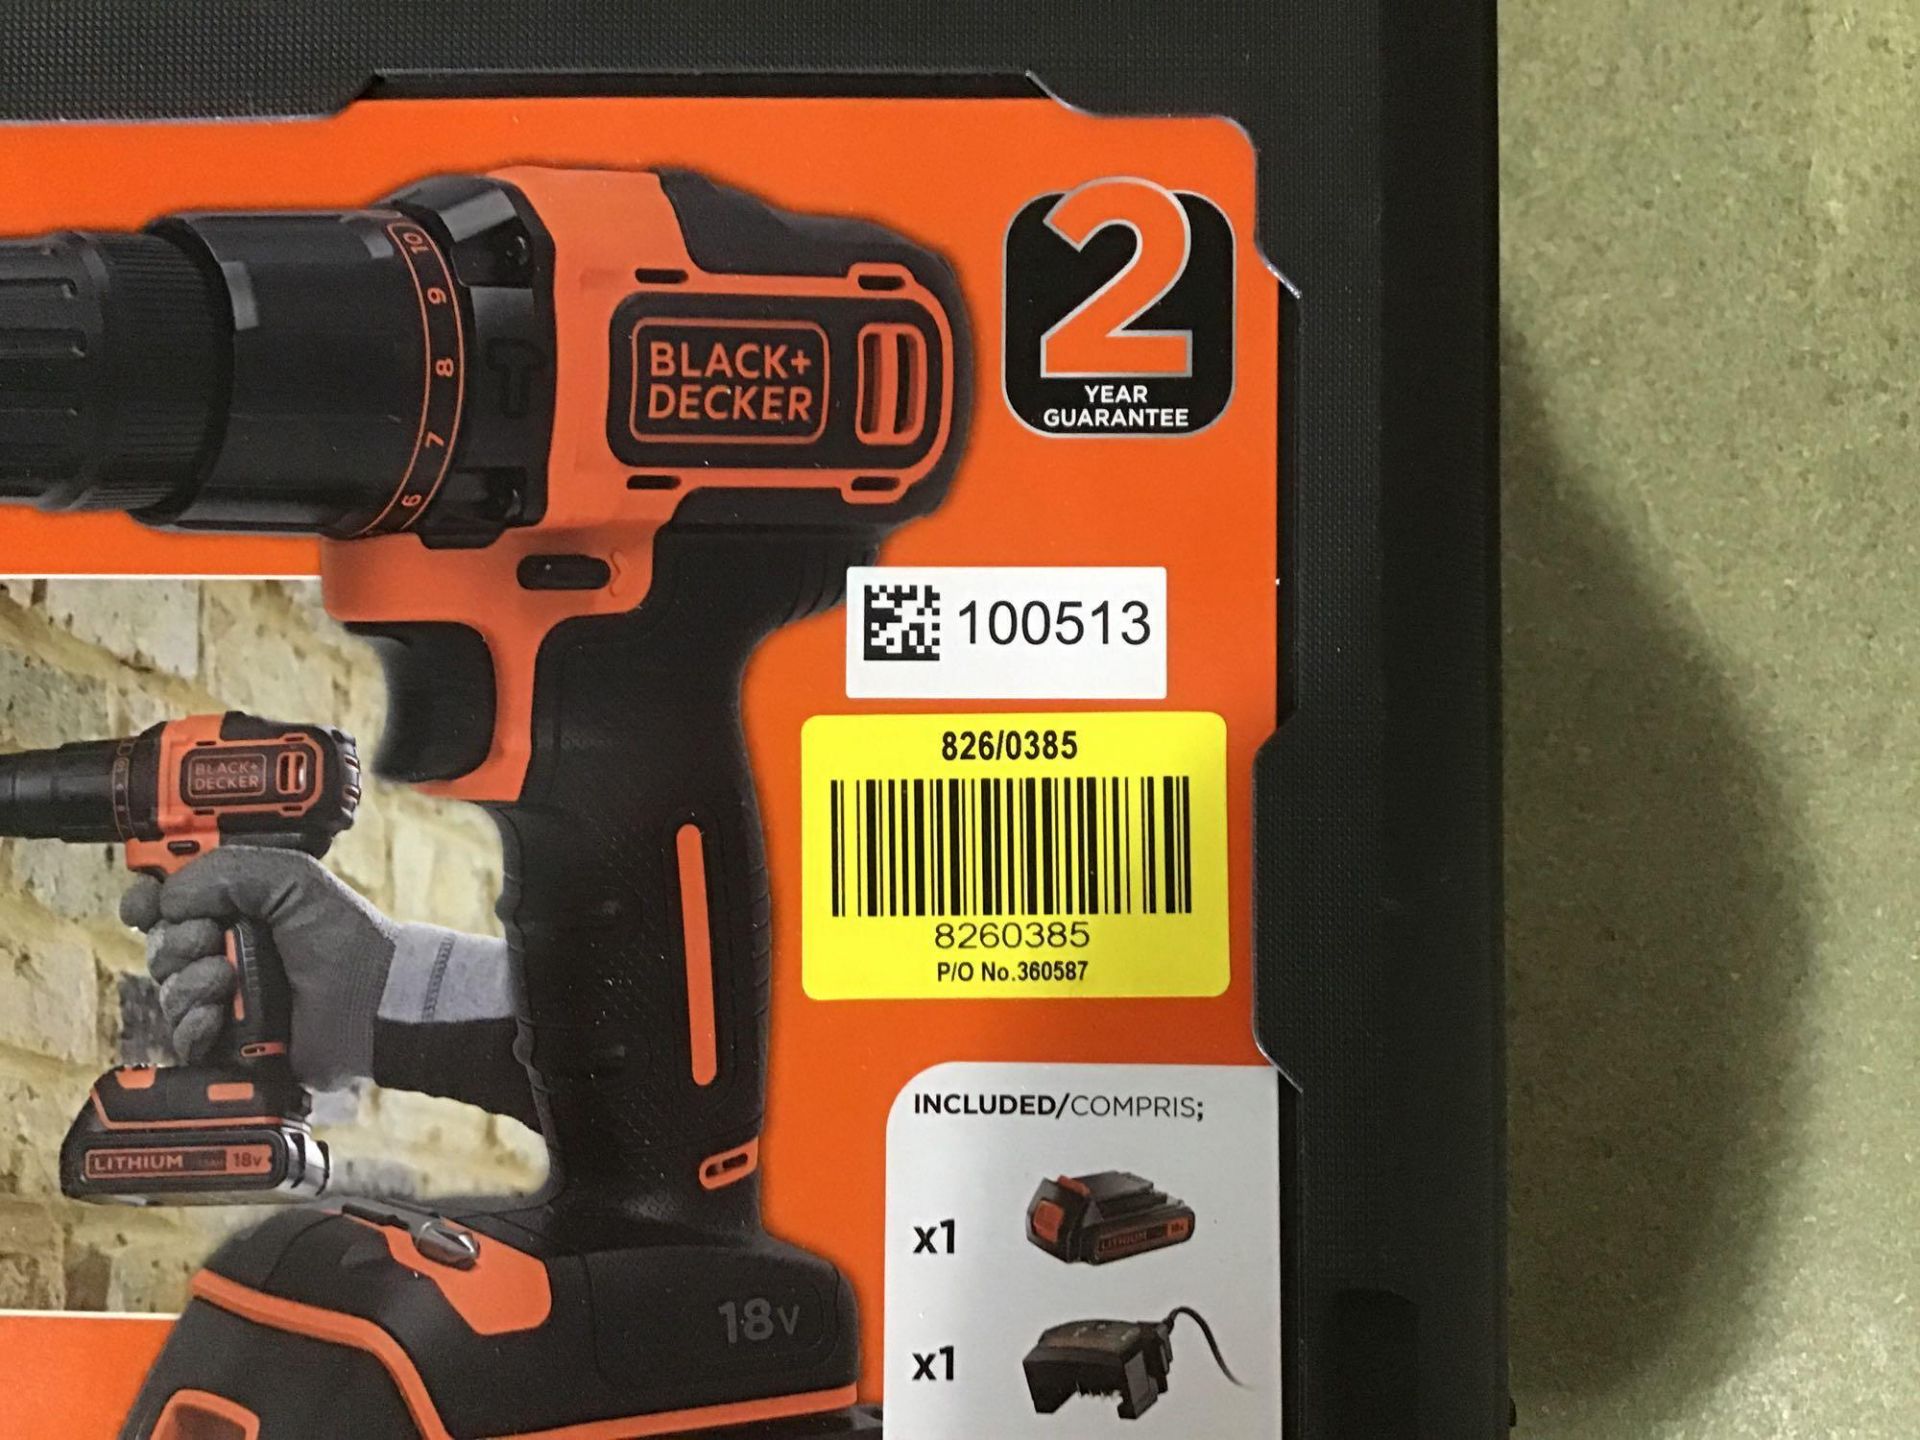 Black + Decker Cordless Hammer Drill with Battery - 18V - £50.00 RRP - Image 3 of 3